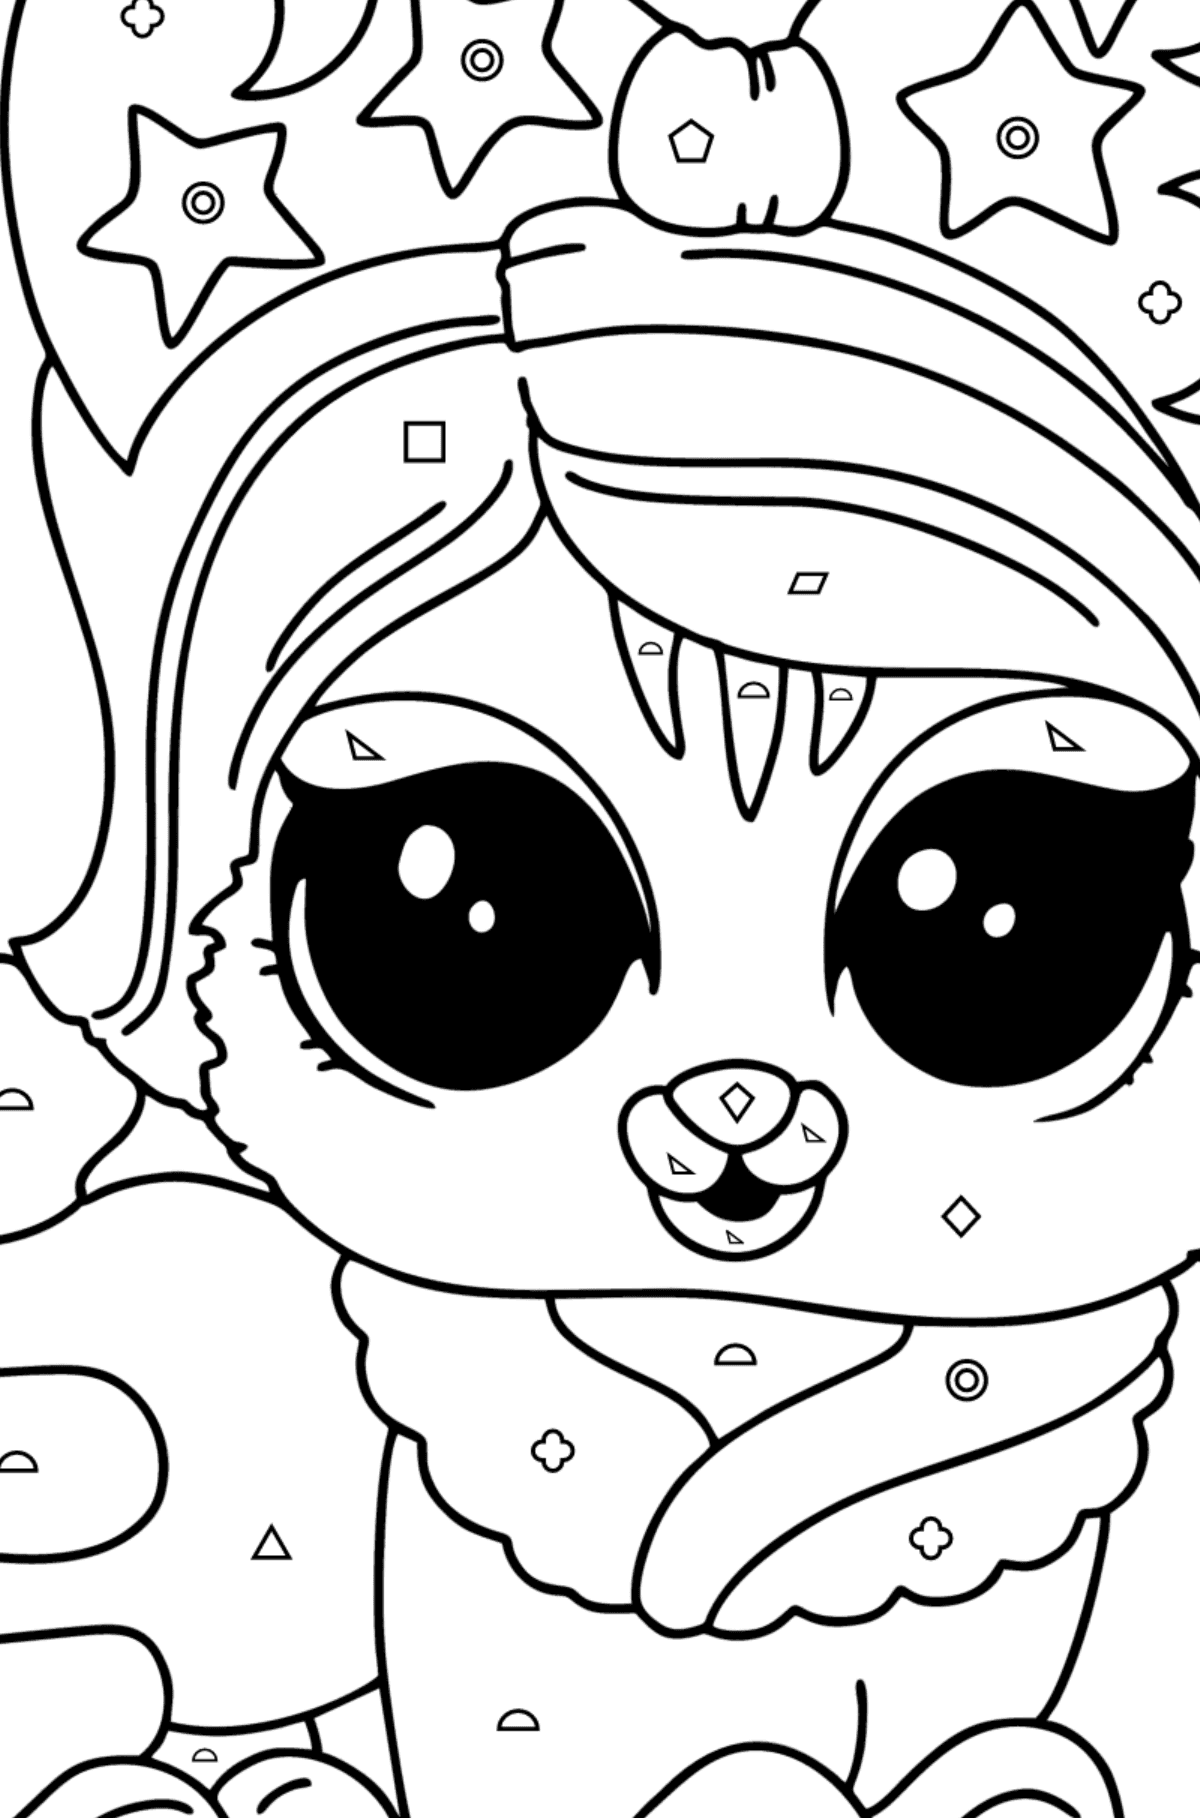 Coloring page LOL Pet Kitty - Coloring by Geometric Shapes for Kids